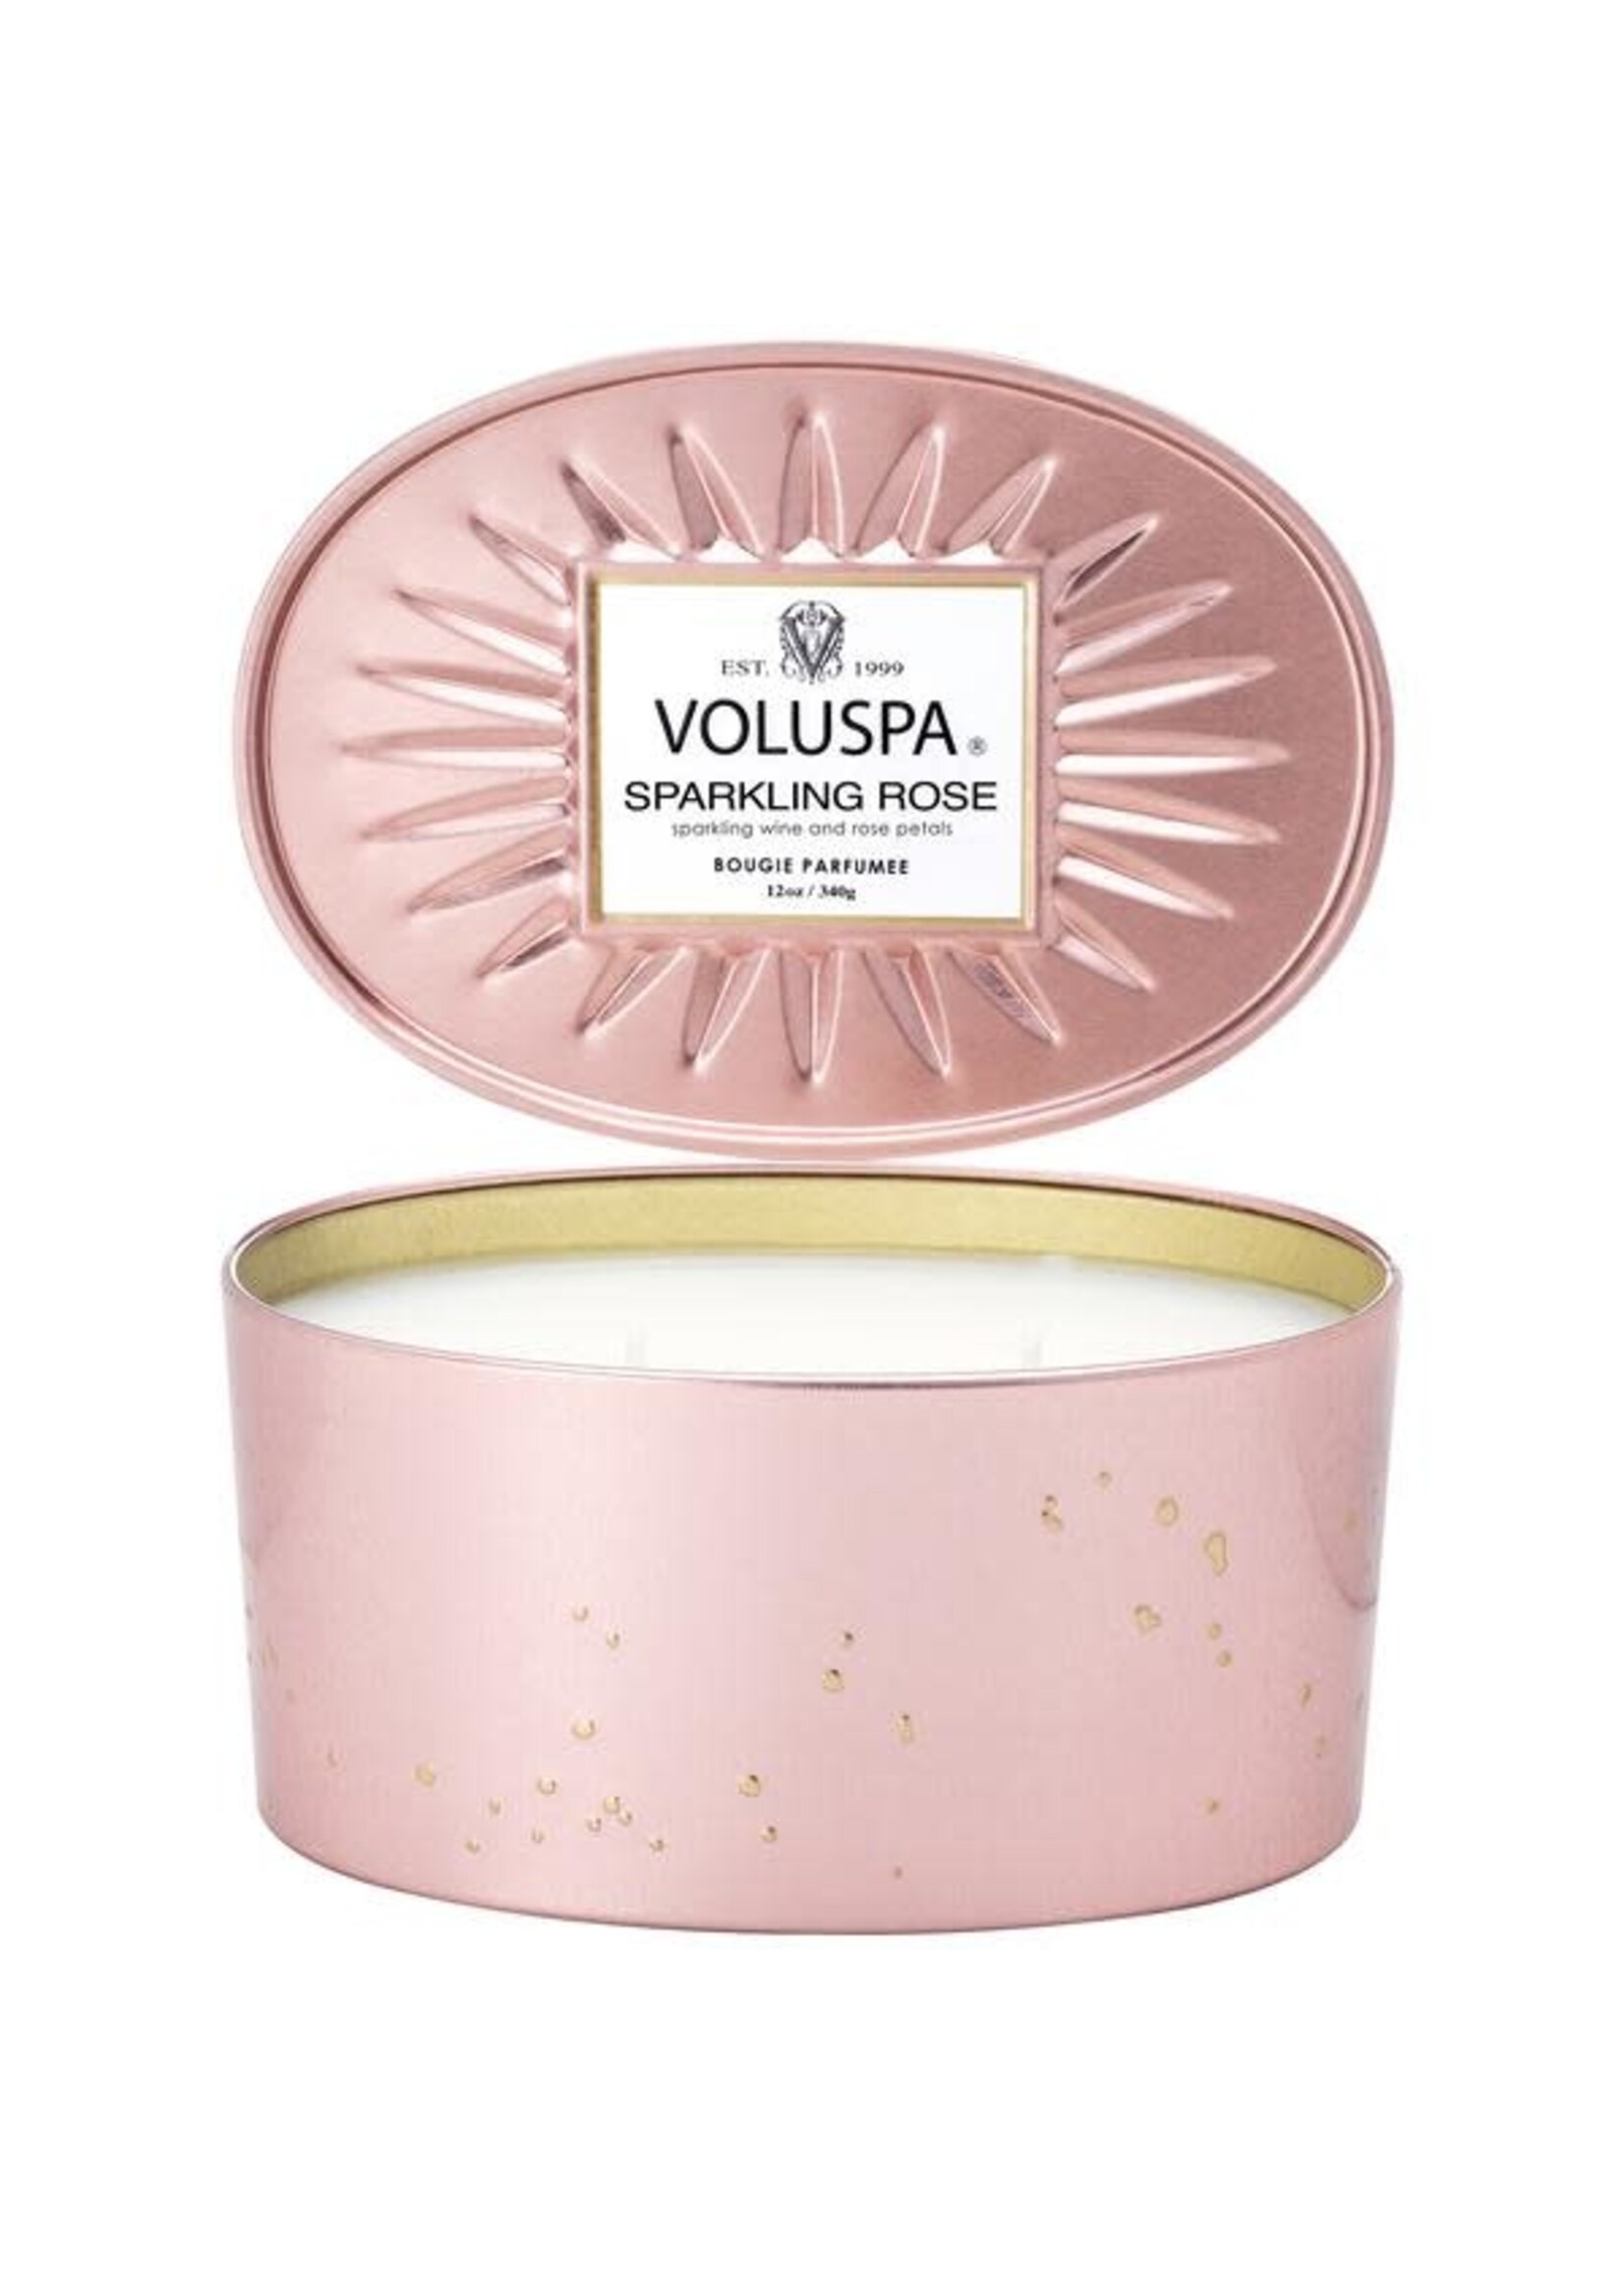 Voluspa Sparkling Rose 2 wick candle in a decorative oval tin